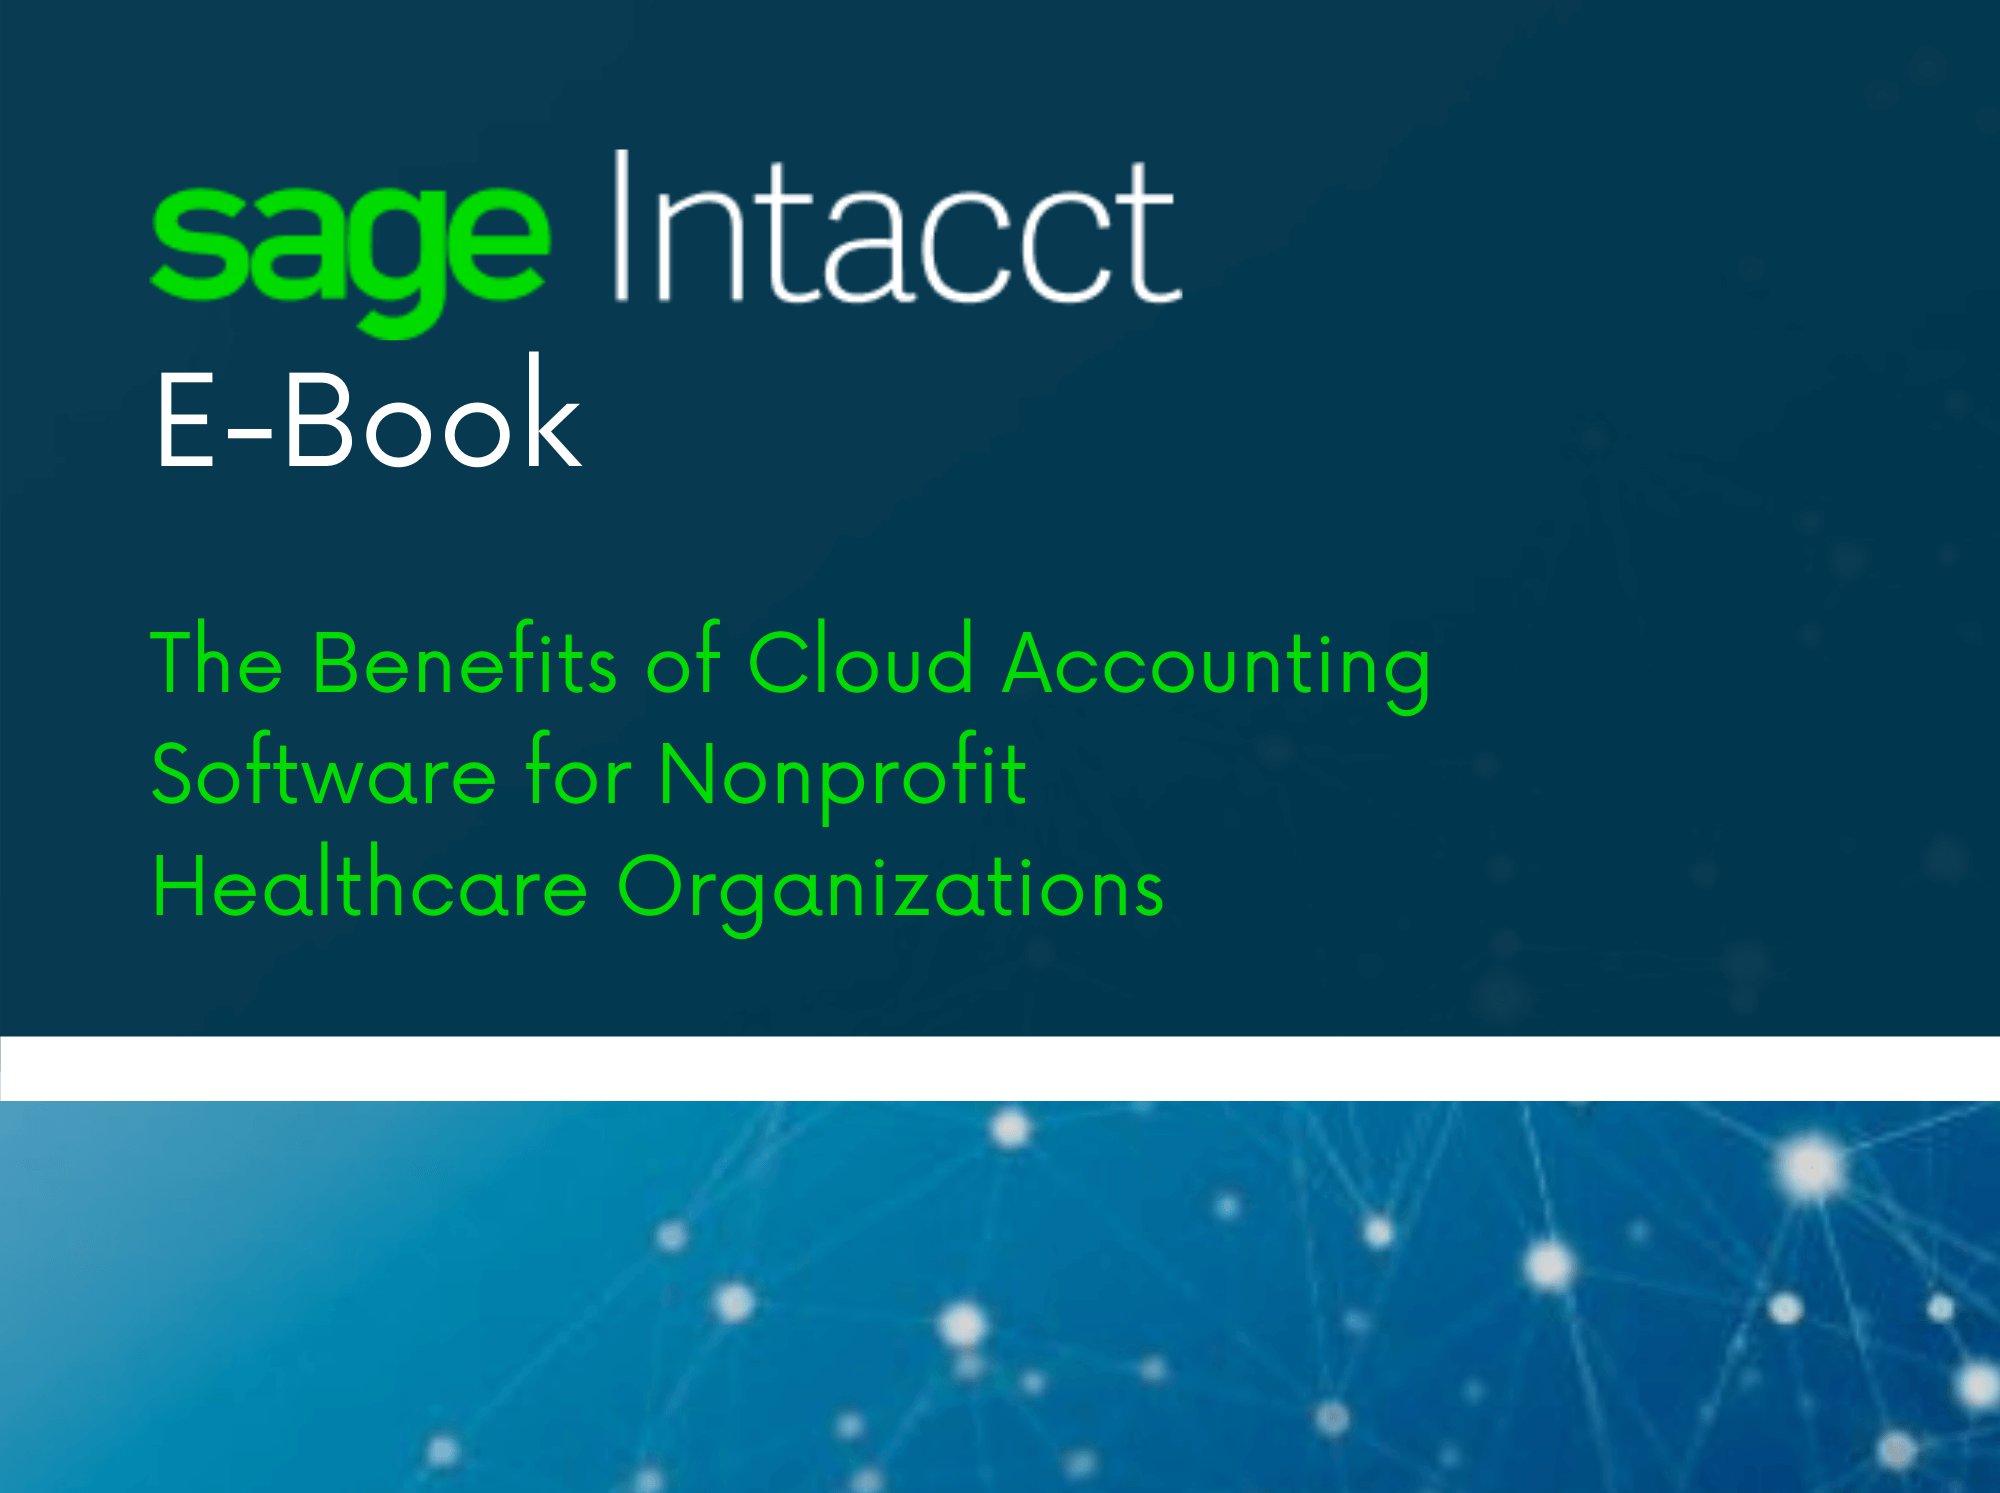 The Benefits of Cloud Accounting Software for Nonprofit Healthcare Organizations - Sage Intacct EBook